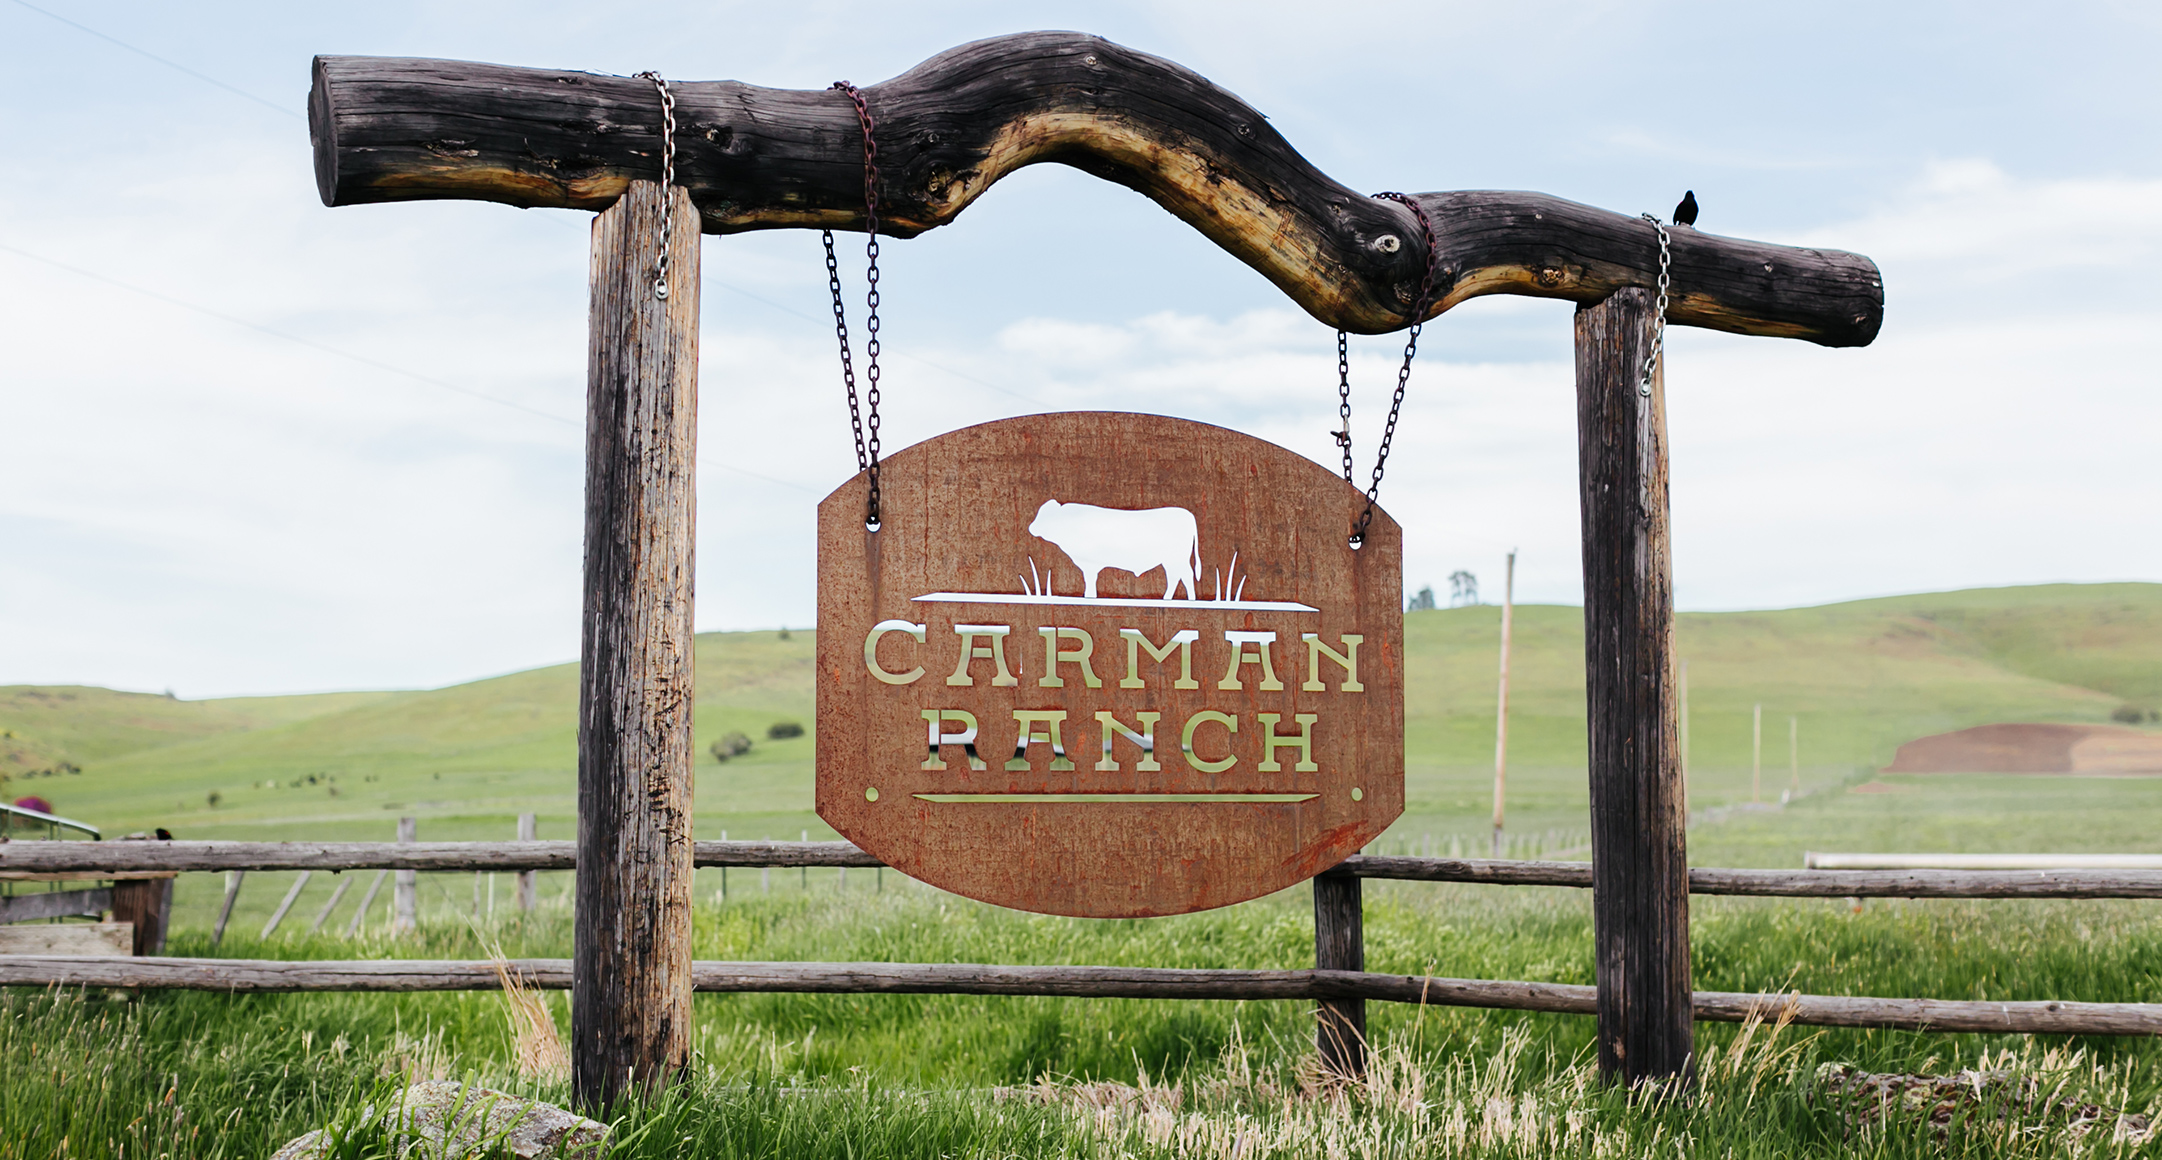 Metal Carman Ranch sign hangs on a rustic wooden frame at farm entrance.